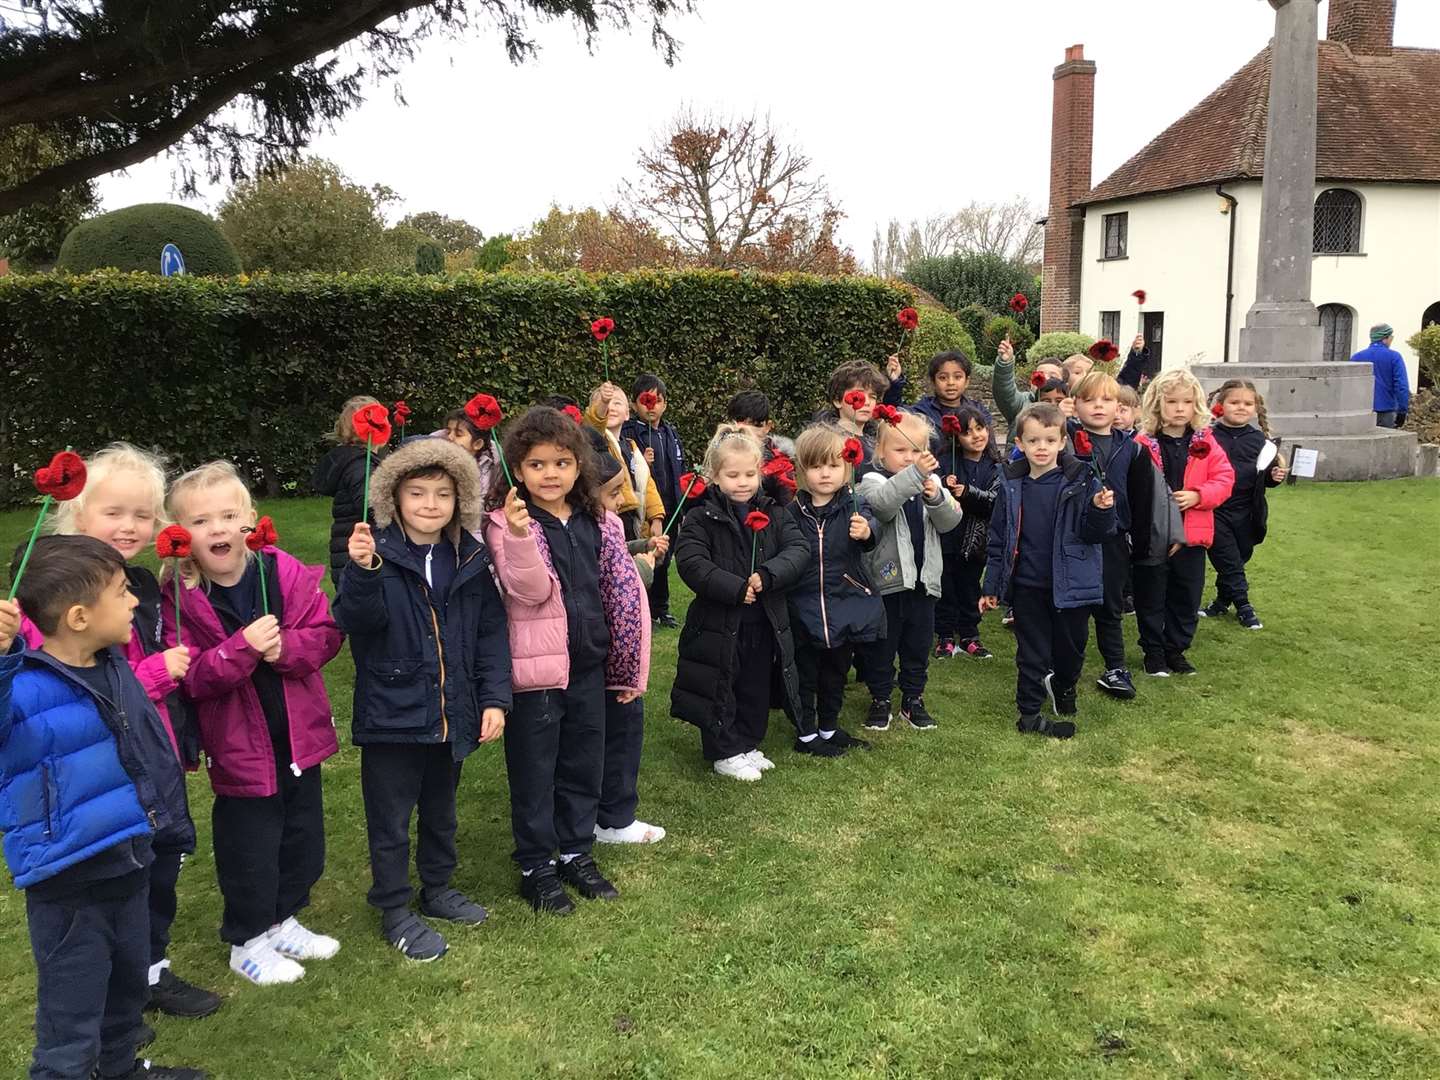 Hundreds of hand-knitted poppies were laid at Cobham War Memorial by school children